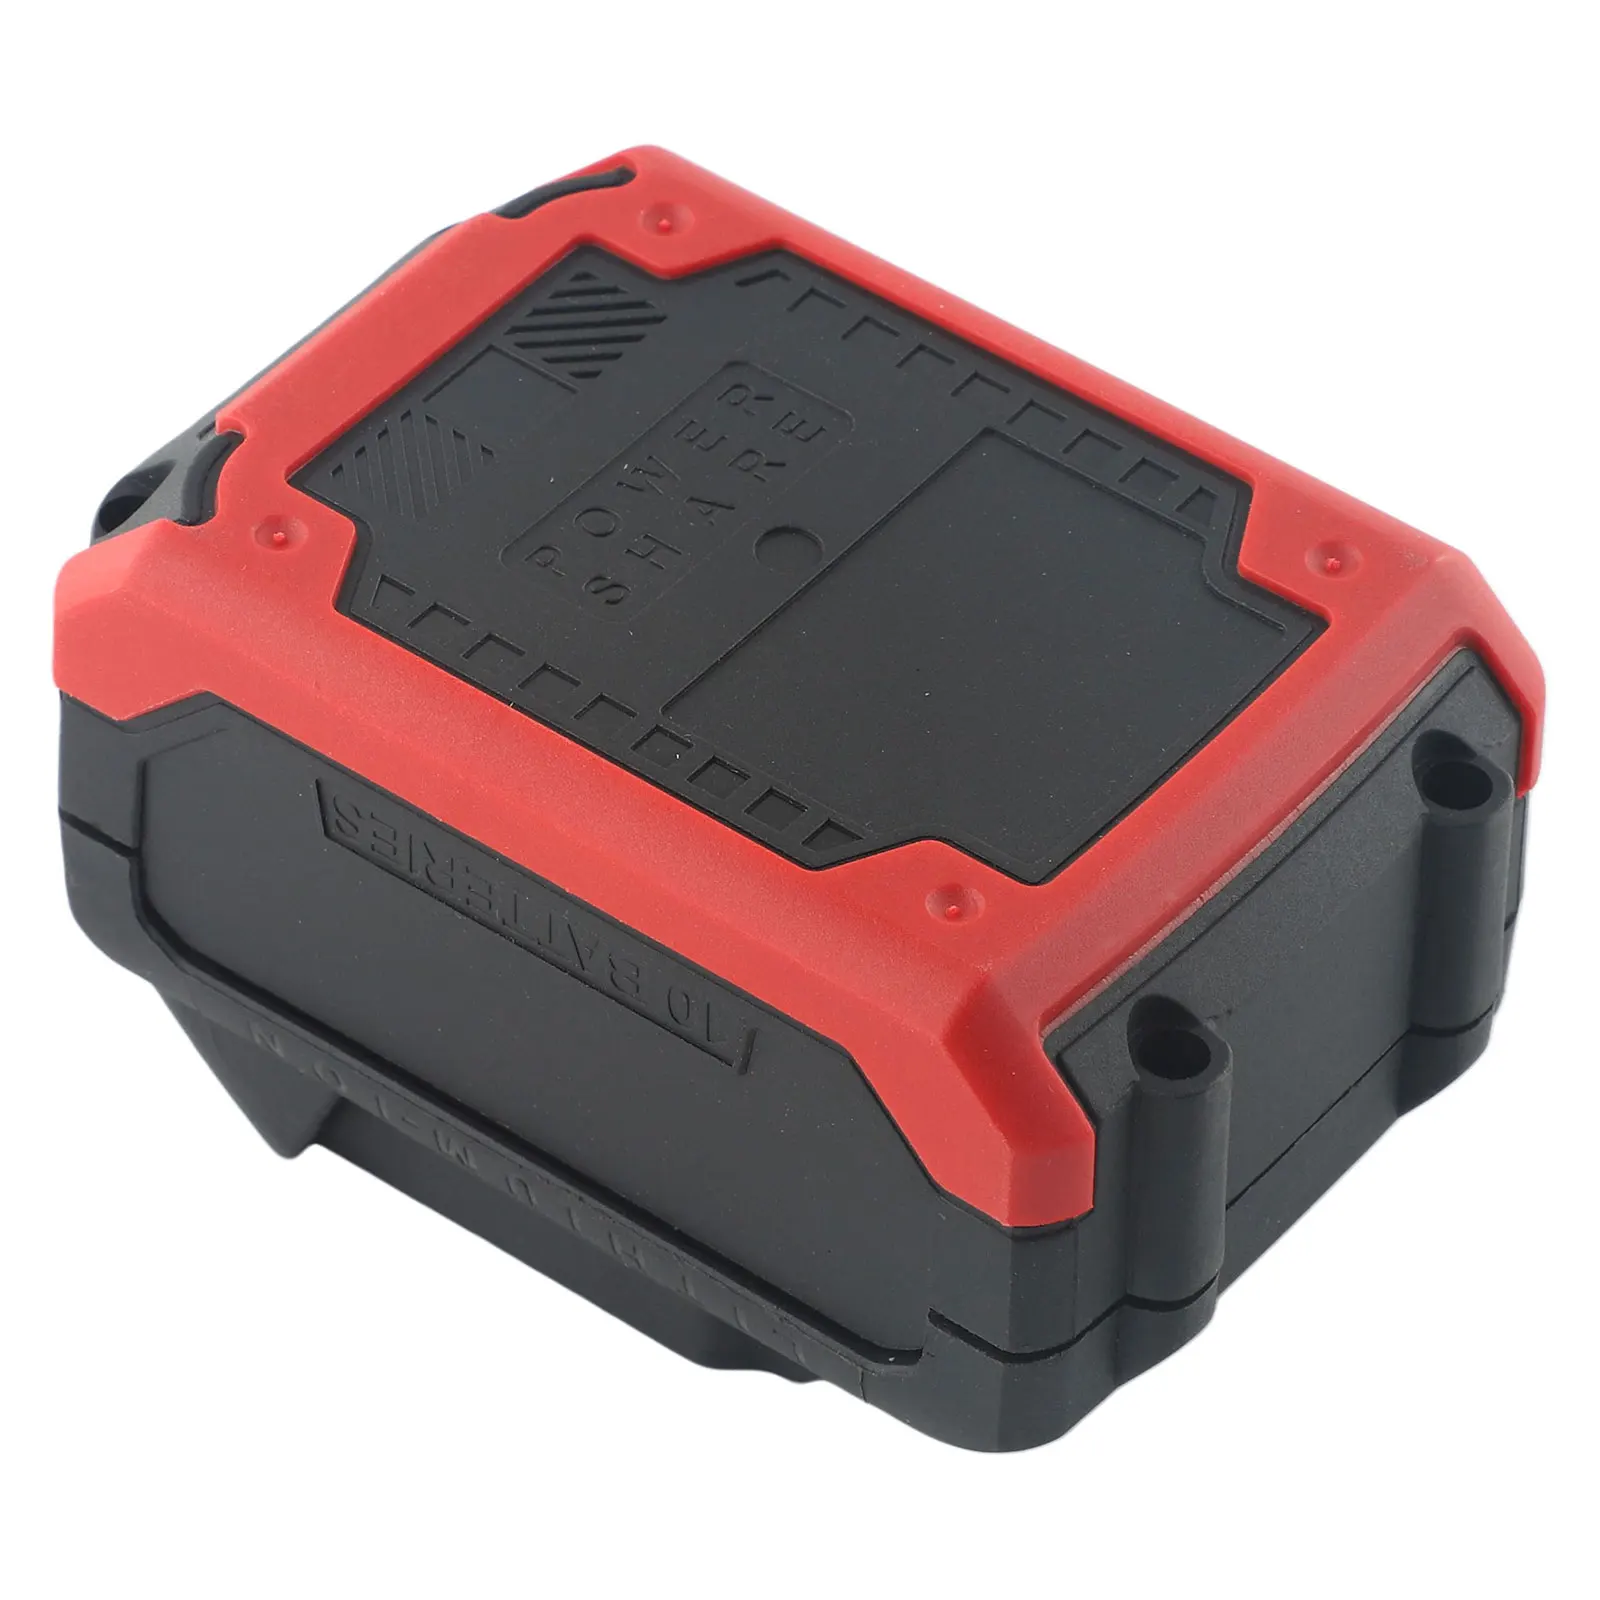 Cores Plastic Battery Case Storage Box Shell PCB Charging Board For Makita Battery Case Power Tool Accessories for galaxy a50 sm a505f charging port board